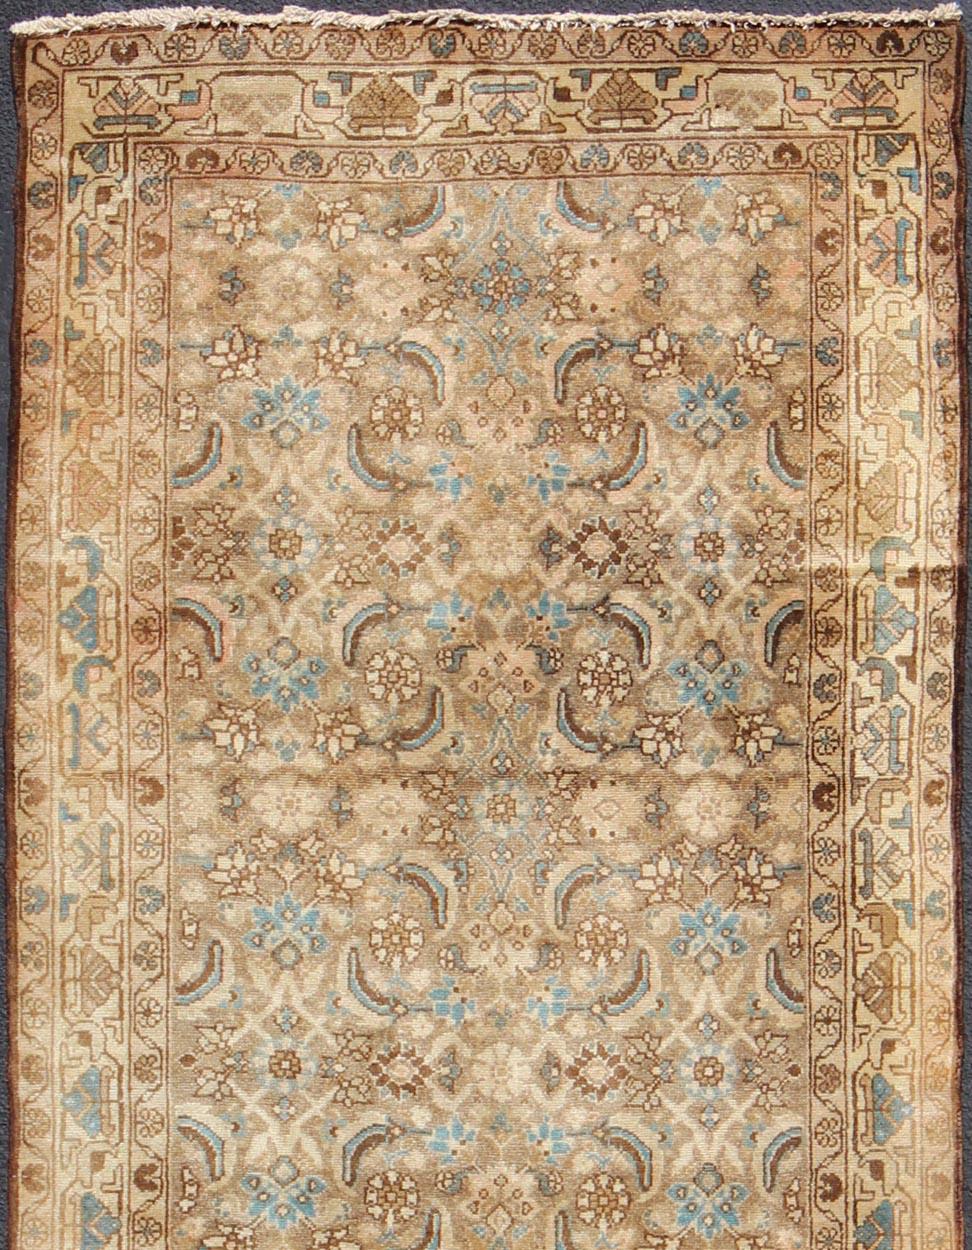 Measures: 3'7 x 9'9.
Midcentury Persian Hamedan runner with ornate all-over design in brown and tan. Keivan Woven Arts / rug H-1006-05, country of origin / type: Iran / Hamedan, circa 1950.

This vintage Persian Hamedan gallery rug (circa mid-20th